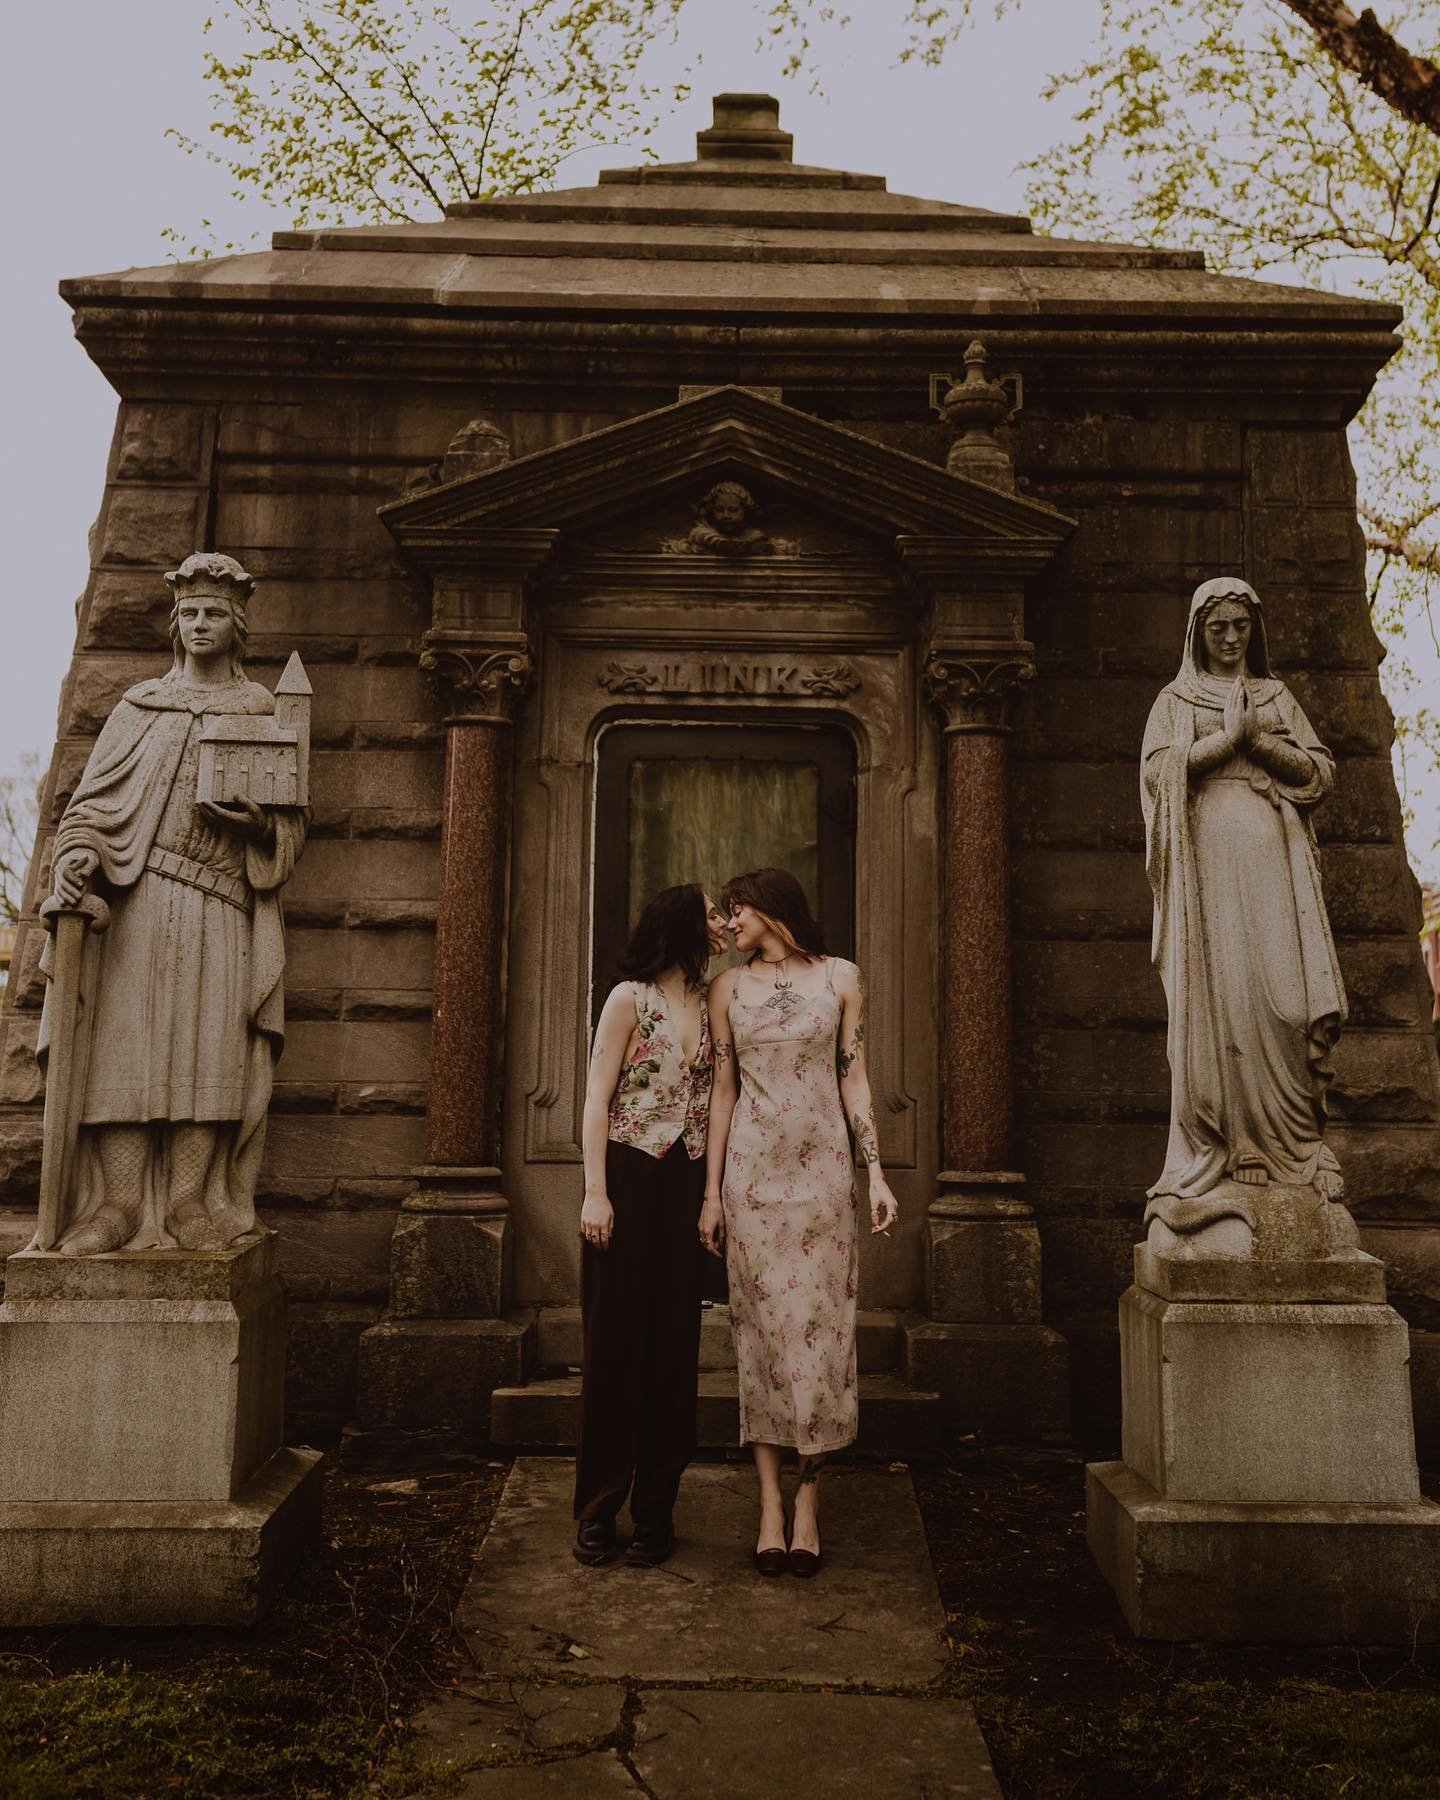 The link spot a lil spooky🫢🪦✨Jules + Cait Creative Couples Portraits #chicagophotographer #candidphotographer #cemetaryphotography #documentarycouplesphotographer #crypt